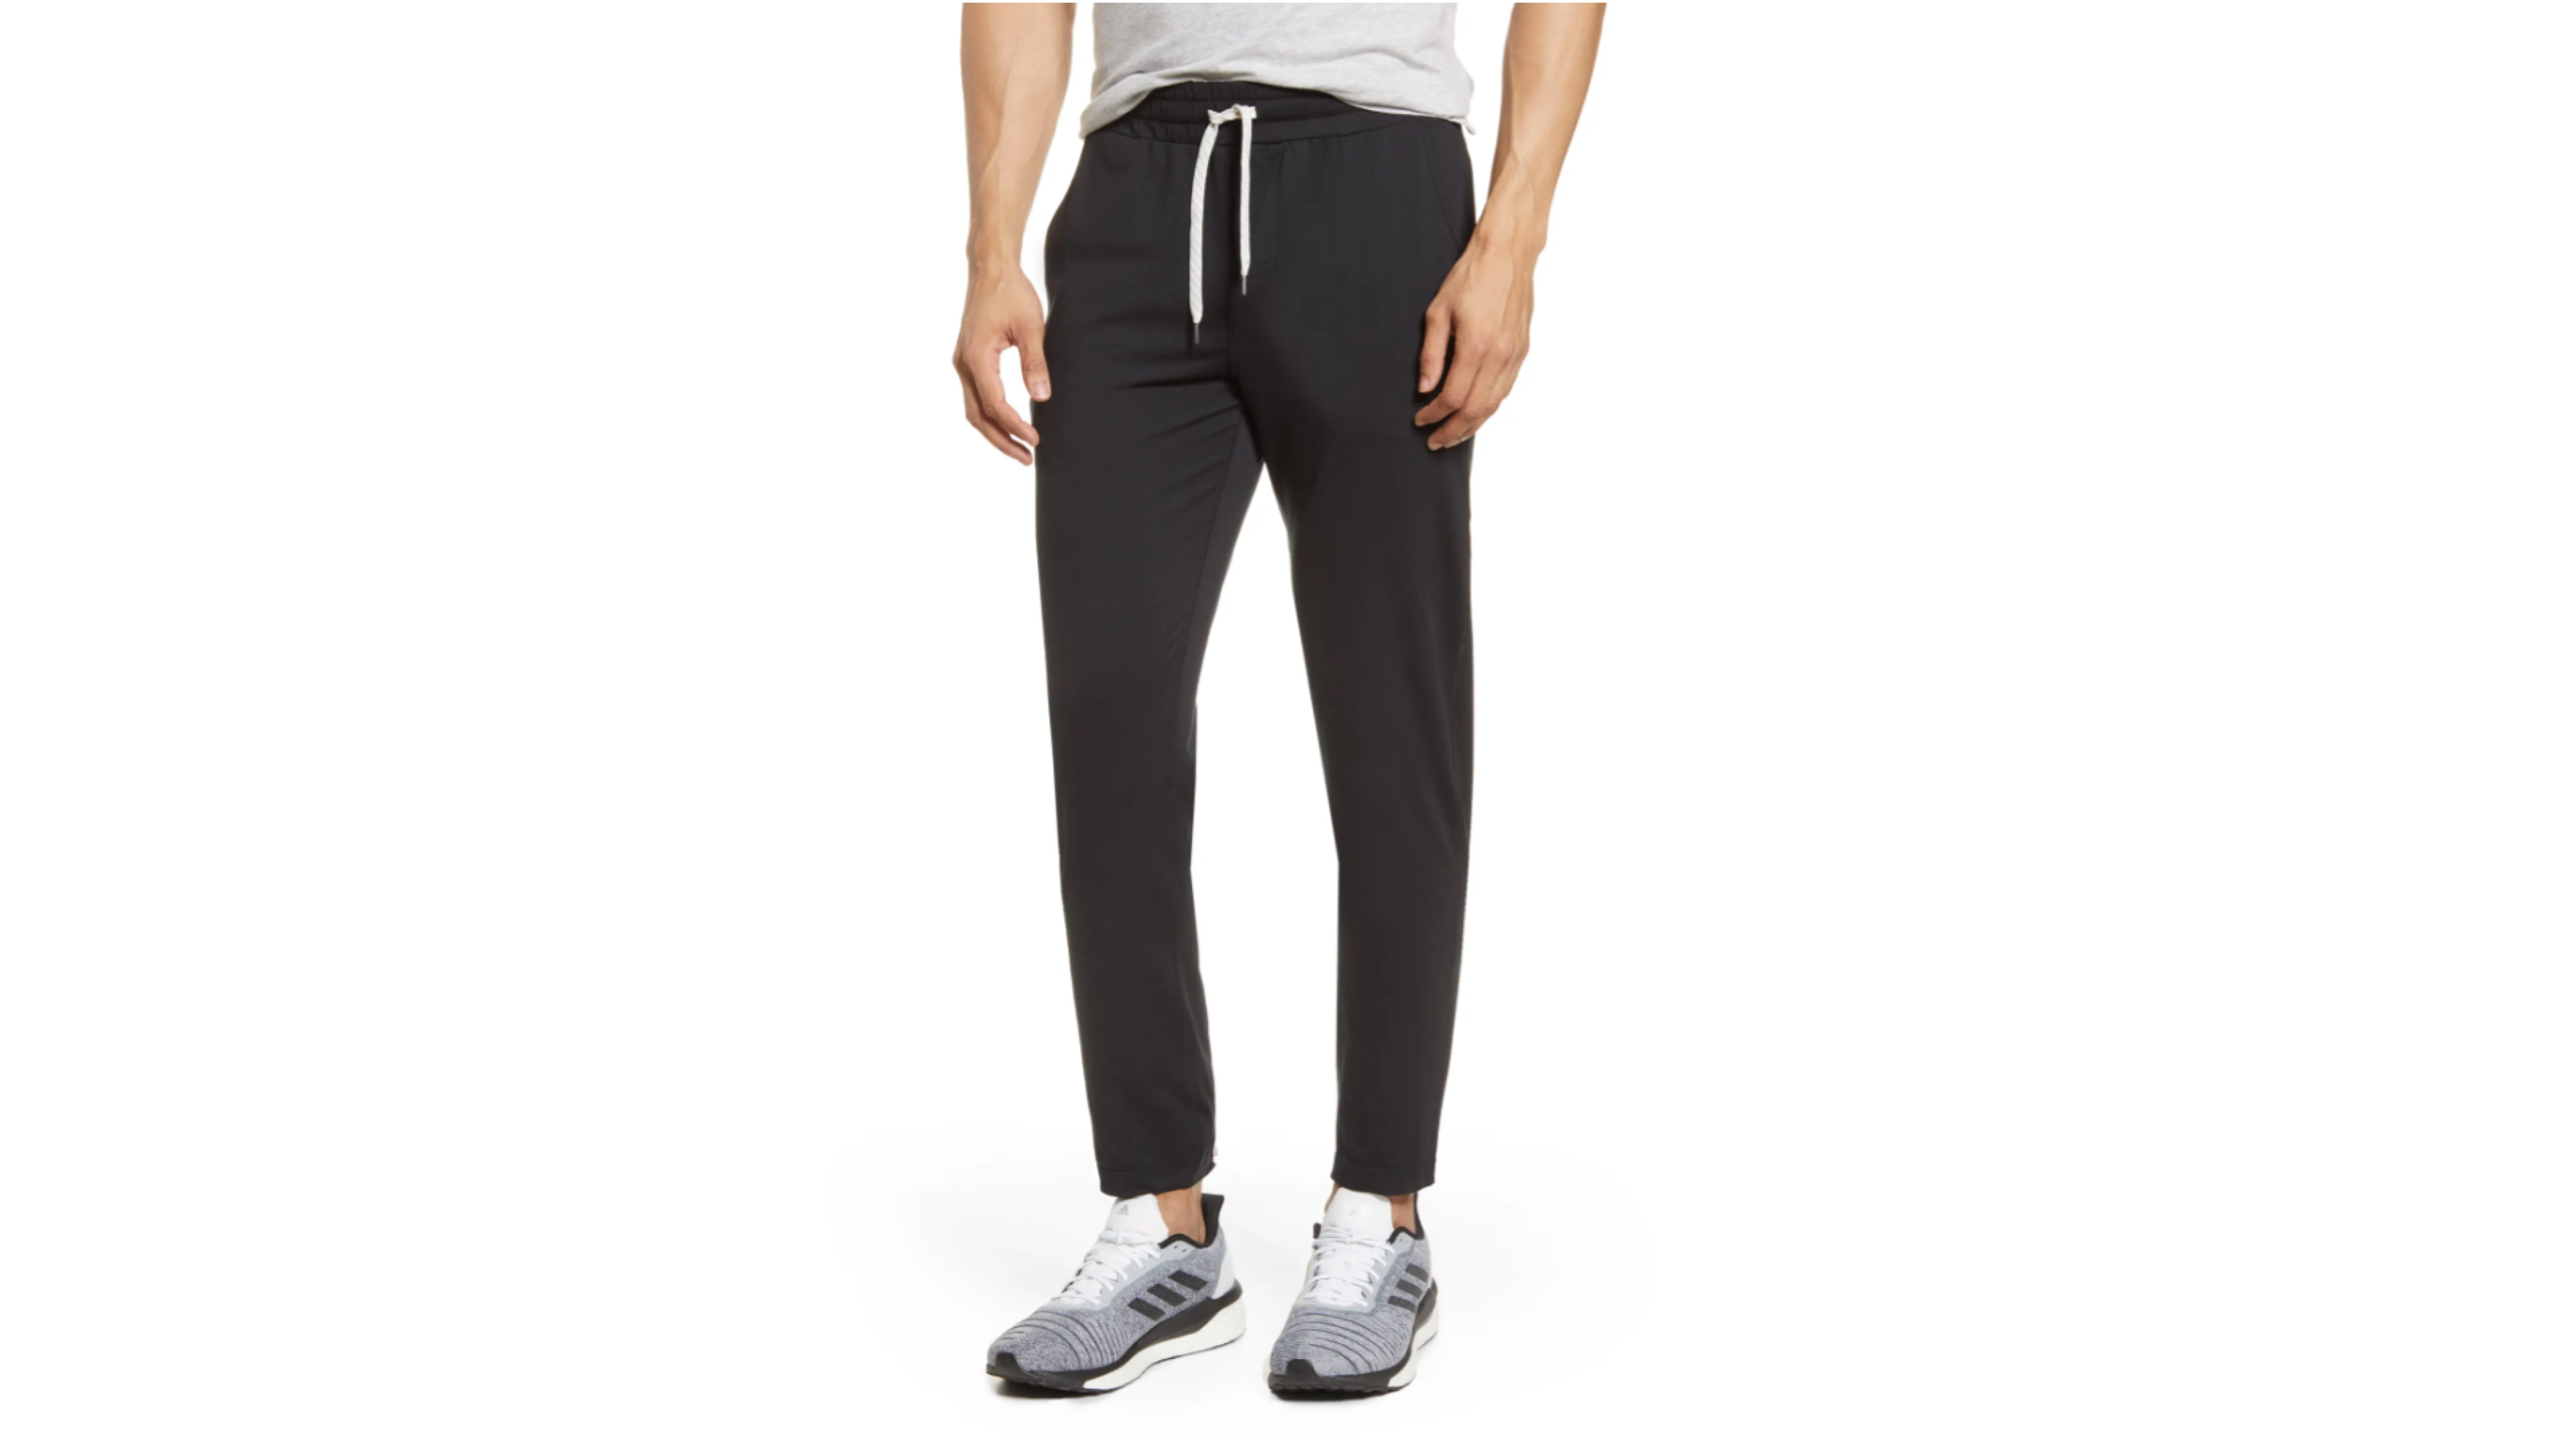 men's relaxed fit lounge pants with a drawstring waist